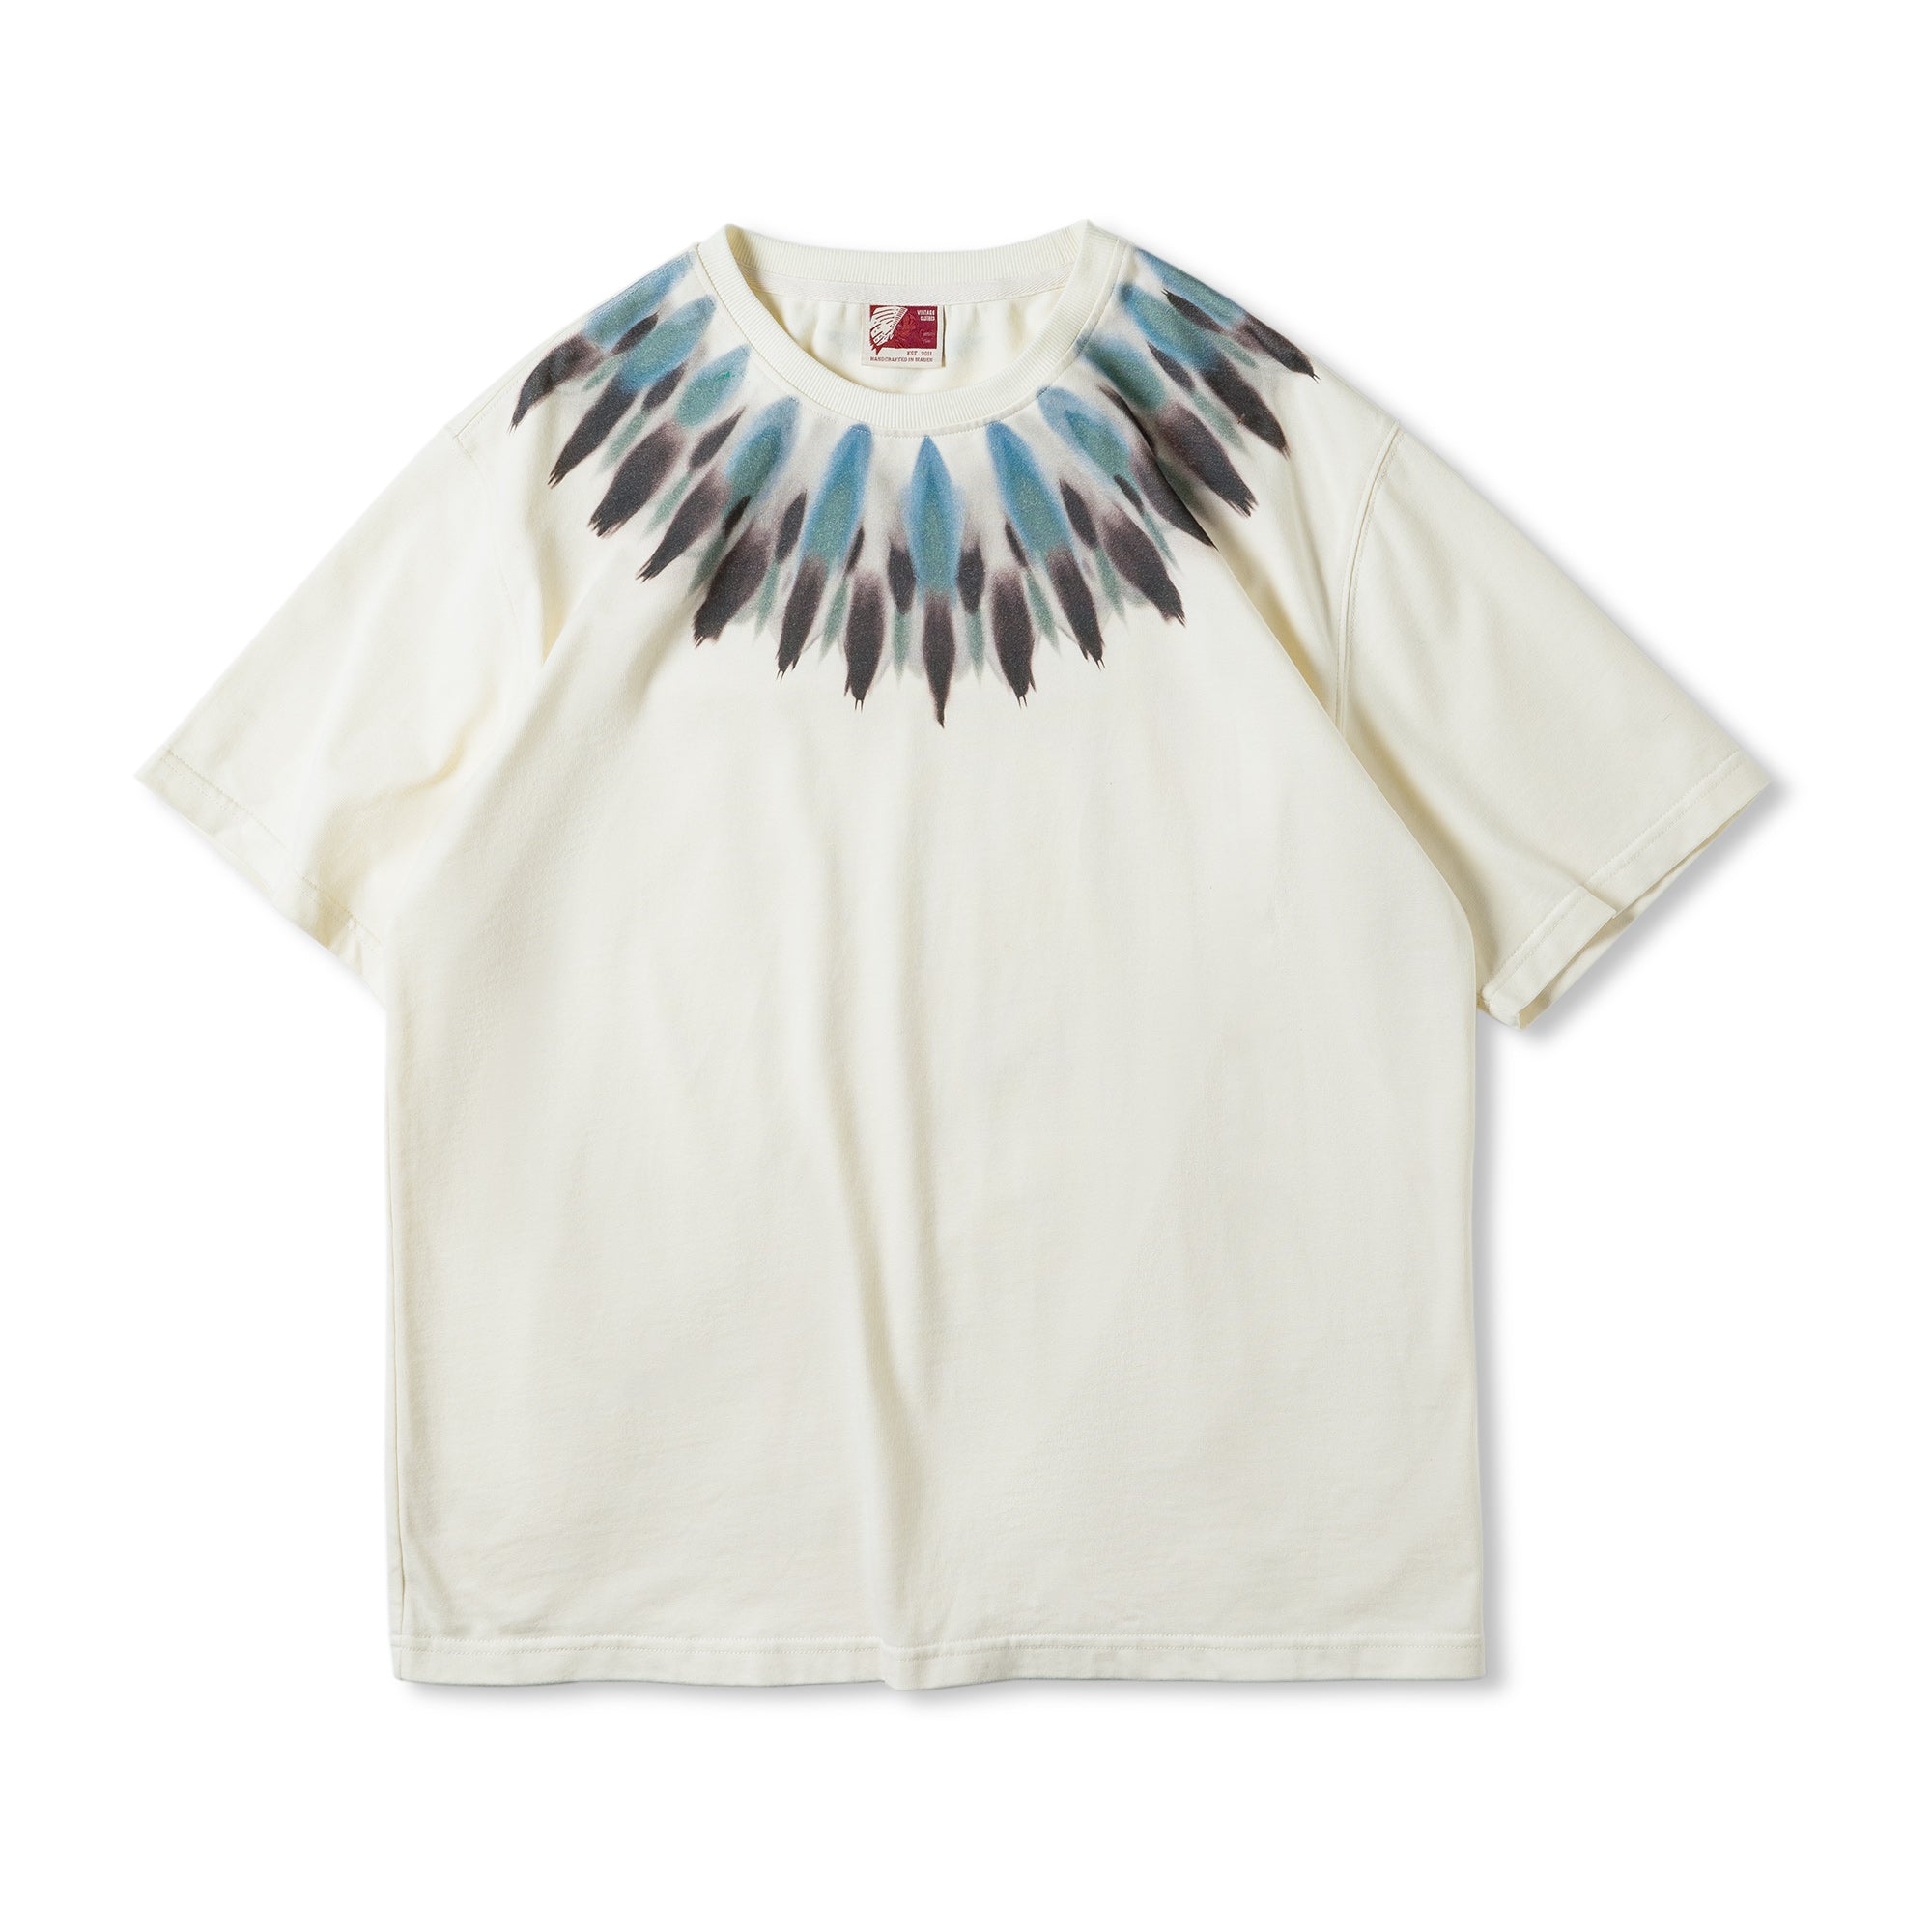 Retro Ethnic Print Men's Summer T-Shirt with Indian Feather Design